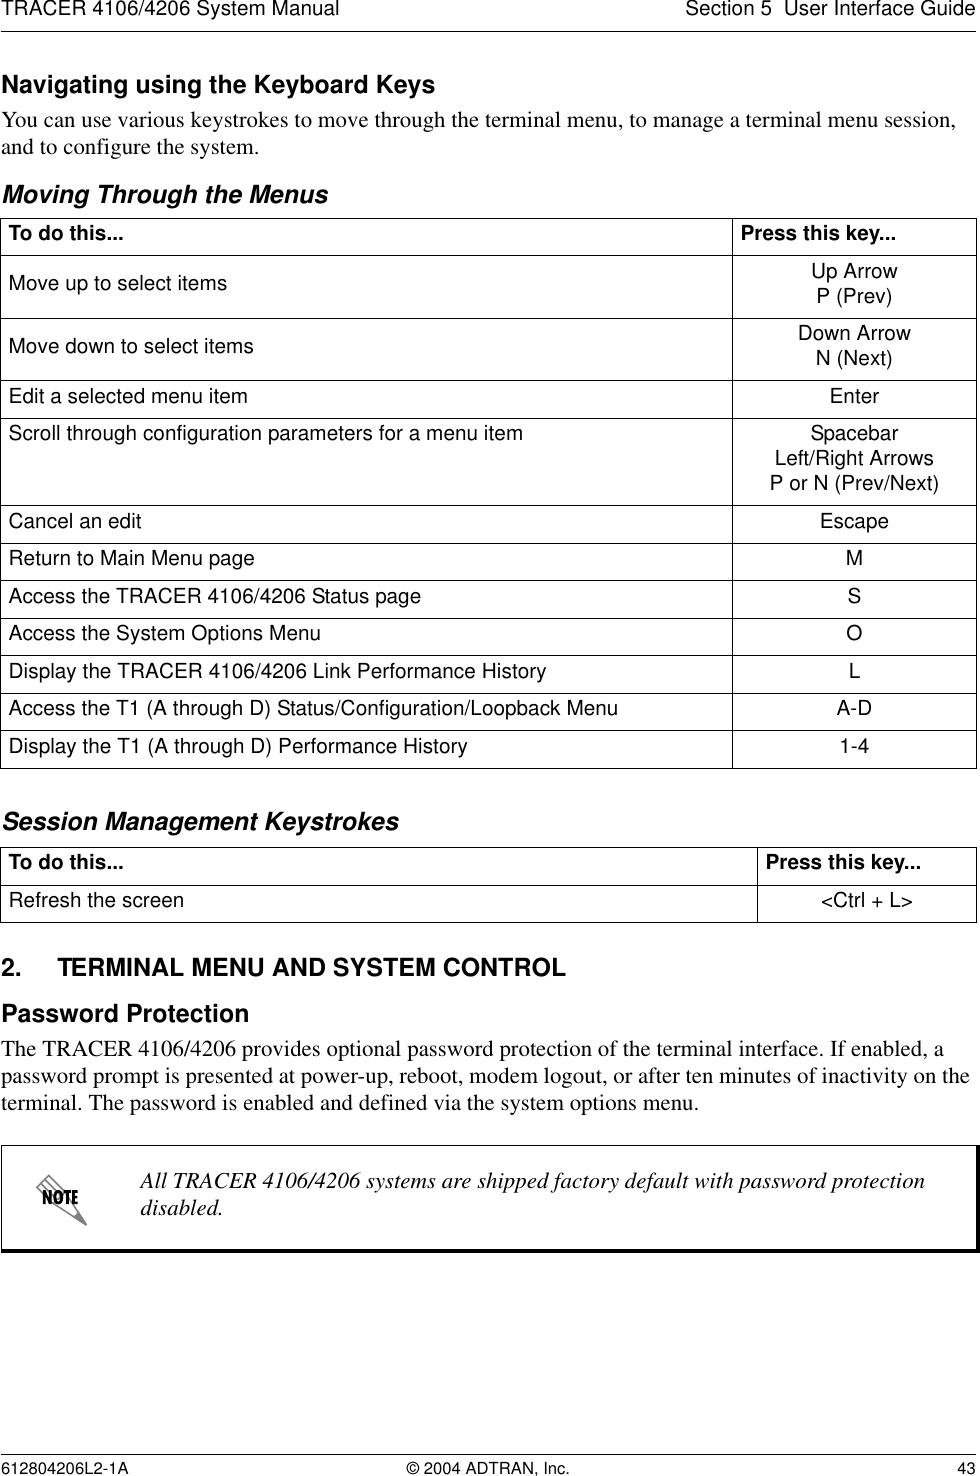 TRACER 4106/4206 System Manual Section 5  User Interface Guide612804206L2-1A © 2004 ADTRAN, Inc. 43Navigating using the Keyboard KeysYou can use various keystrokes to move through the terminal menu, to manage a terminal menu session, and to configure the system.Moving Through the MenusSession Management Keystrokes2. TERMINAL MENU AND SYSTEM CONTROLPassword ProtectionThe TRACER 4106/4206 provides optional password protection of the terminal interface. If enabled, a password prompt is presented at power-up, reboot, modem logout, or after ten minutes of inactivity on the terminal. The password is enabled and defined via the system options menu.To do this... Press this key...Move up to select items Up ArrowP (Prev)Move down to select items Down ArrowN (Next)Edit a selected menu item EnterScroll through configuration parameters for a menu item SpacebarLeft/Right ArrowsP or N (Prev/Next)Cancel an edit EscapeReturn to Main Menu page MAccess the TRACER 4106/4206 Status page SAccess the System Options Menu ODisplay the TRACER 4106/4206 Link Performance History LAccess the T1 (A through D) Status/Configuration/Loopback Menu A-DDisplay the T1 (A through D) Performance History 1-4To do this... Press this key...Refresh the screen &lt;Ctrl + L&gt;All TRACER 4106/4206 systems are shipped factory default with password protection disabled.